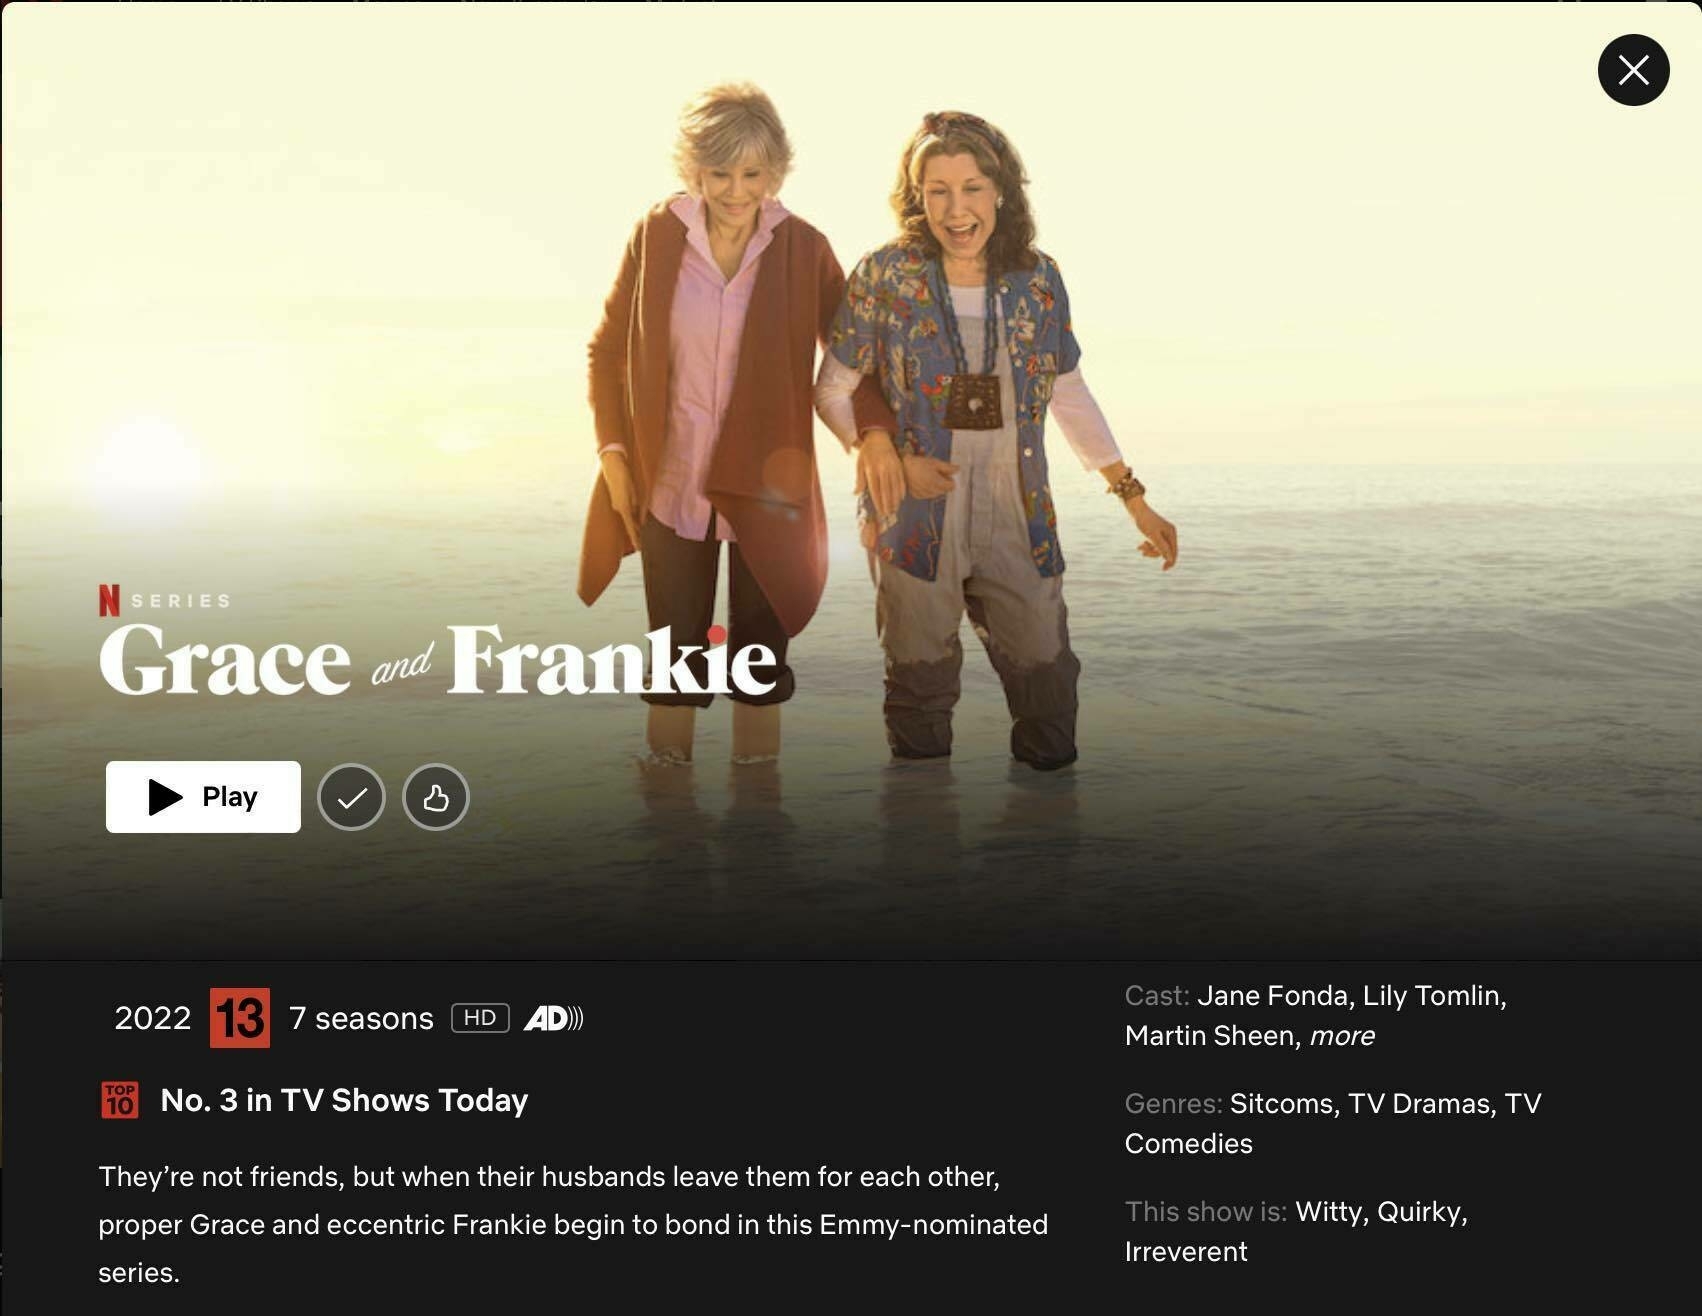 Screen Shot from Grace and Frankie, showing Jane Fonda and Lily Tomlin.  